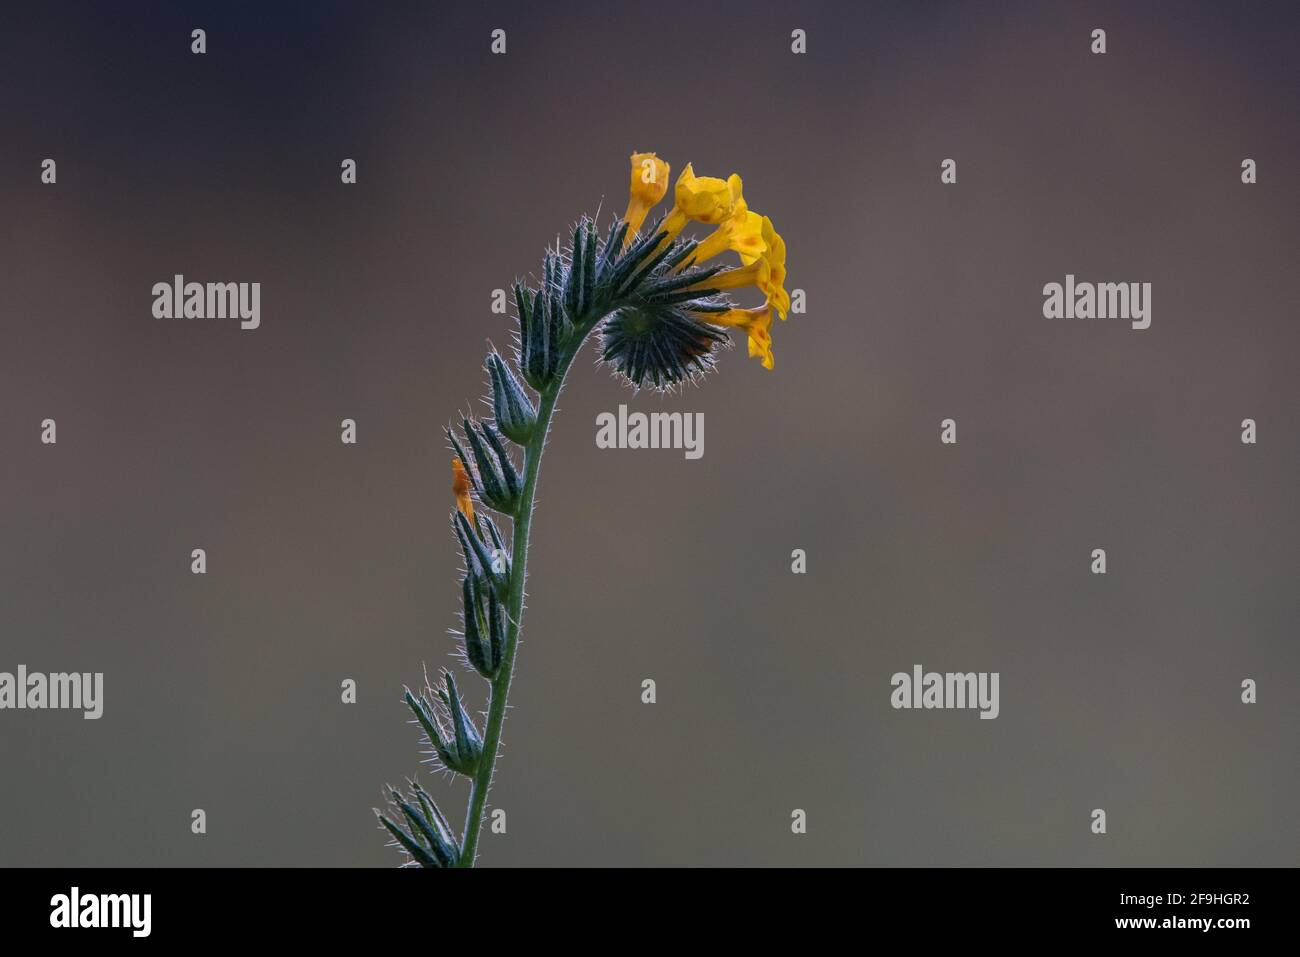 A common fiddleneck wildflower (Amsinckia intermedia) growing wild and blooming in a grassland in Central California. Stock Photo